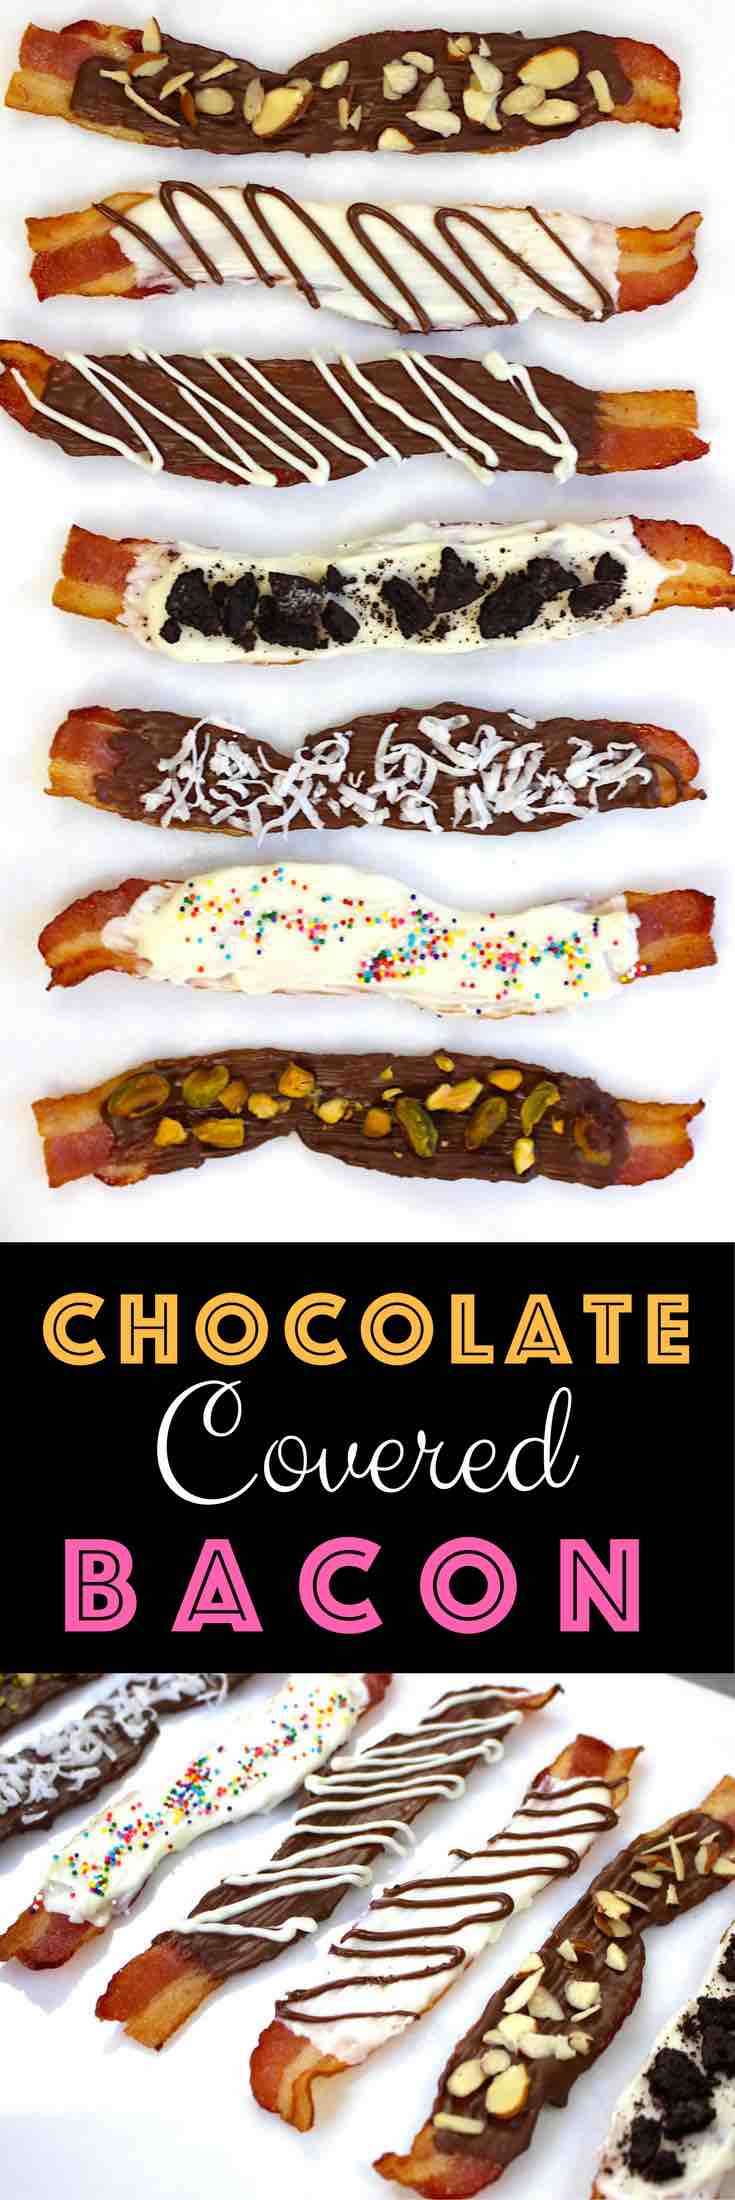 This Chocolate Covered Bacon is an amazing carnival inspired snack with irresistible sweet and salty flavors. Make it for your next party or give it away as a gift. Perfect for Thanksgiving too.